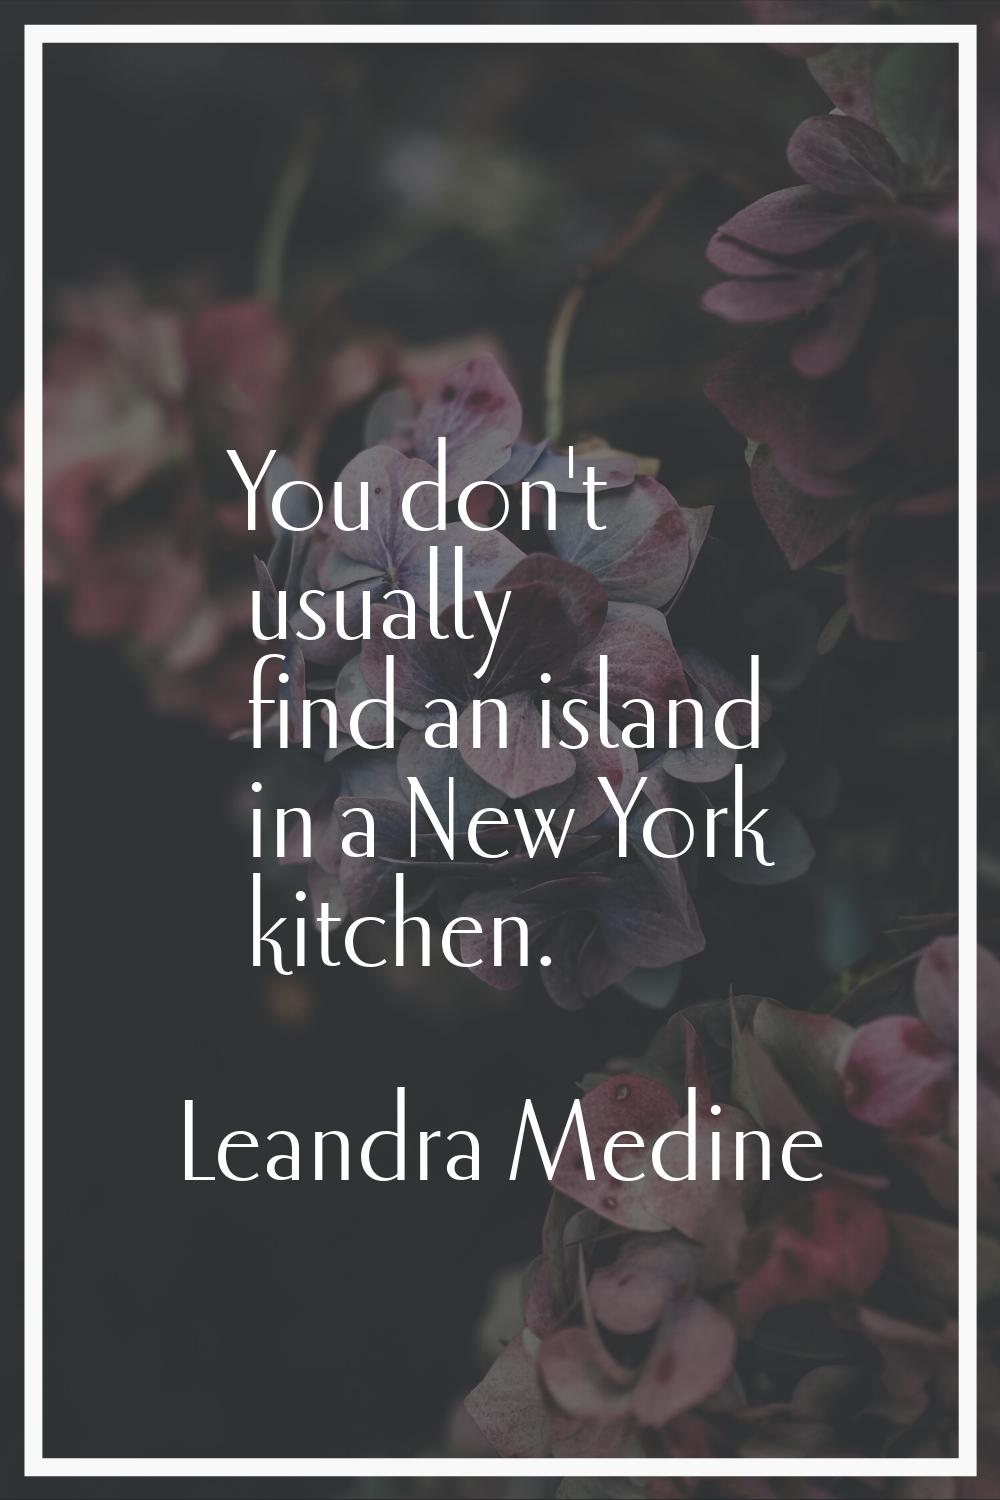 You don't usually find an island in a New York kitchen.